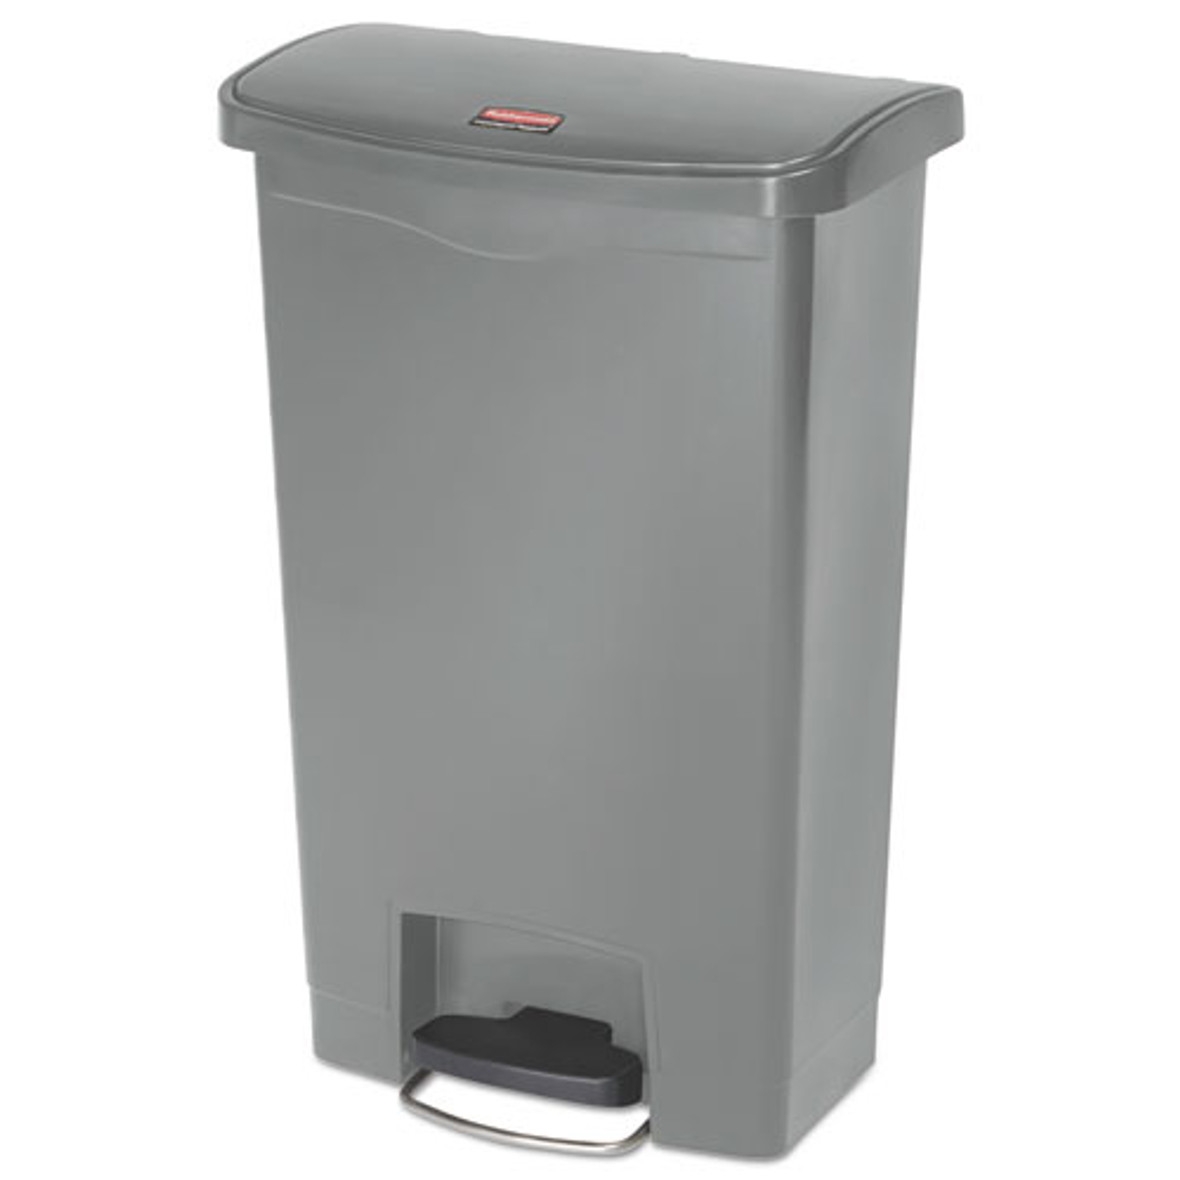 Rubbermaid® Slim Jim Resin Step-on Container, Front Step Style, Gray, 13 gal (Quantity 1)